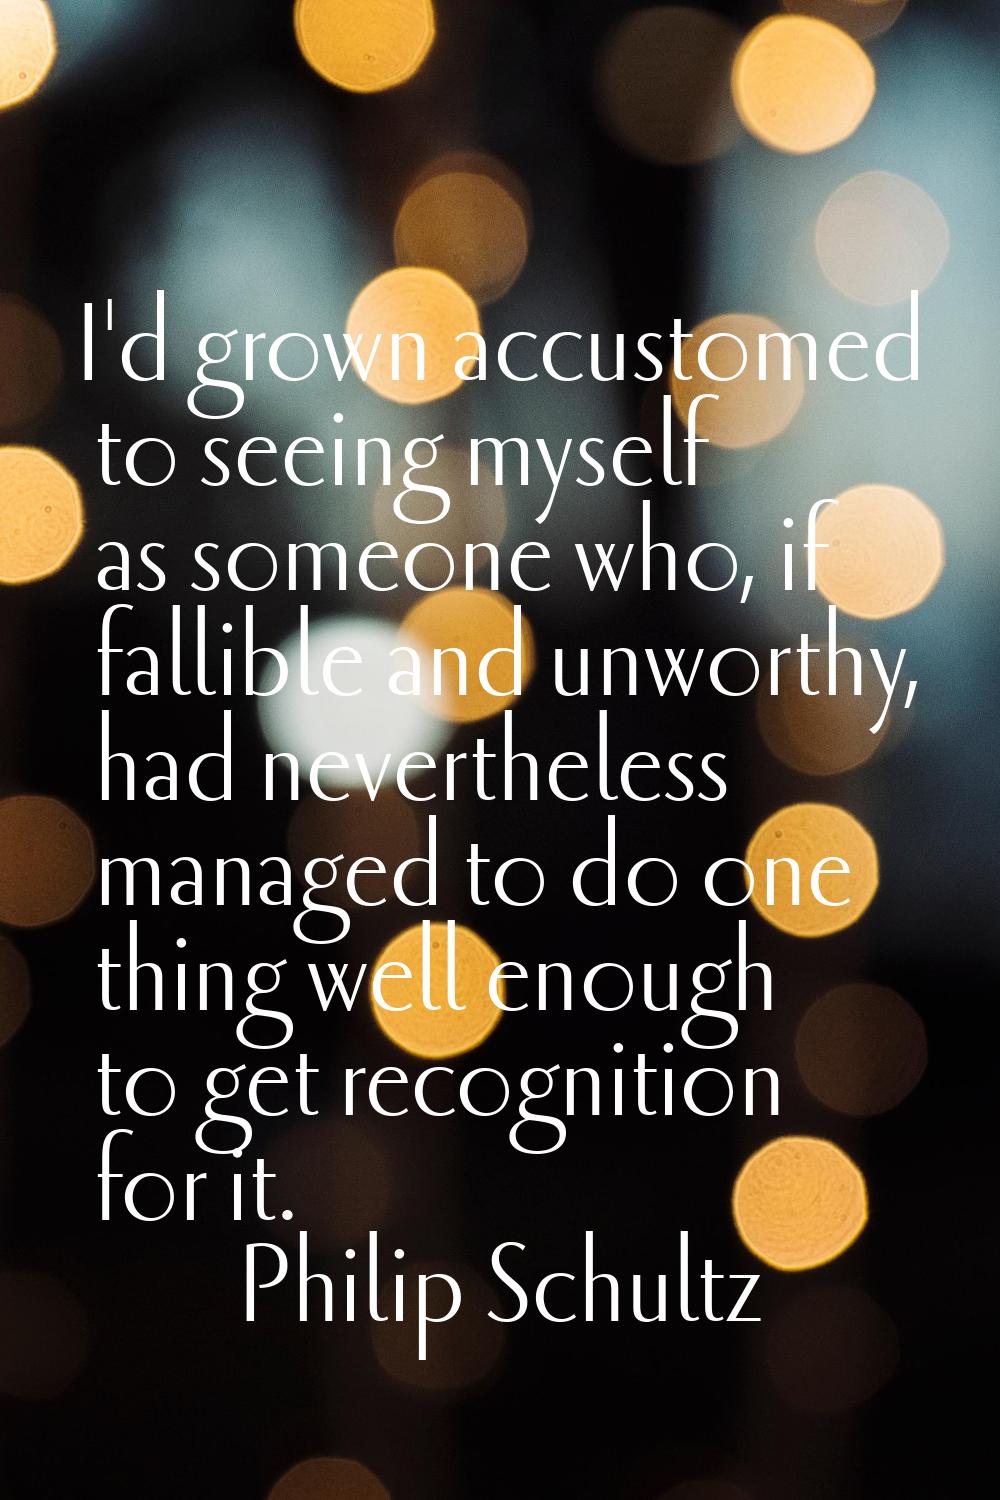 I'd grown accustomed to seeing myself as someone who, if fallible and unworthy, had nevertheless ma